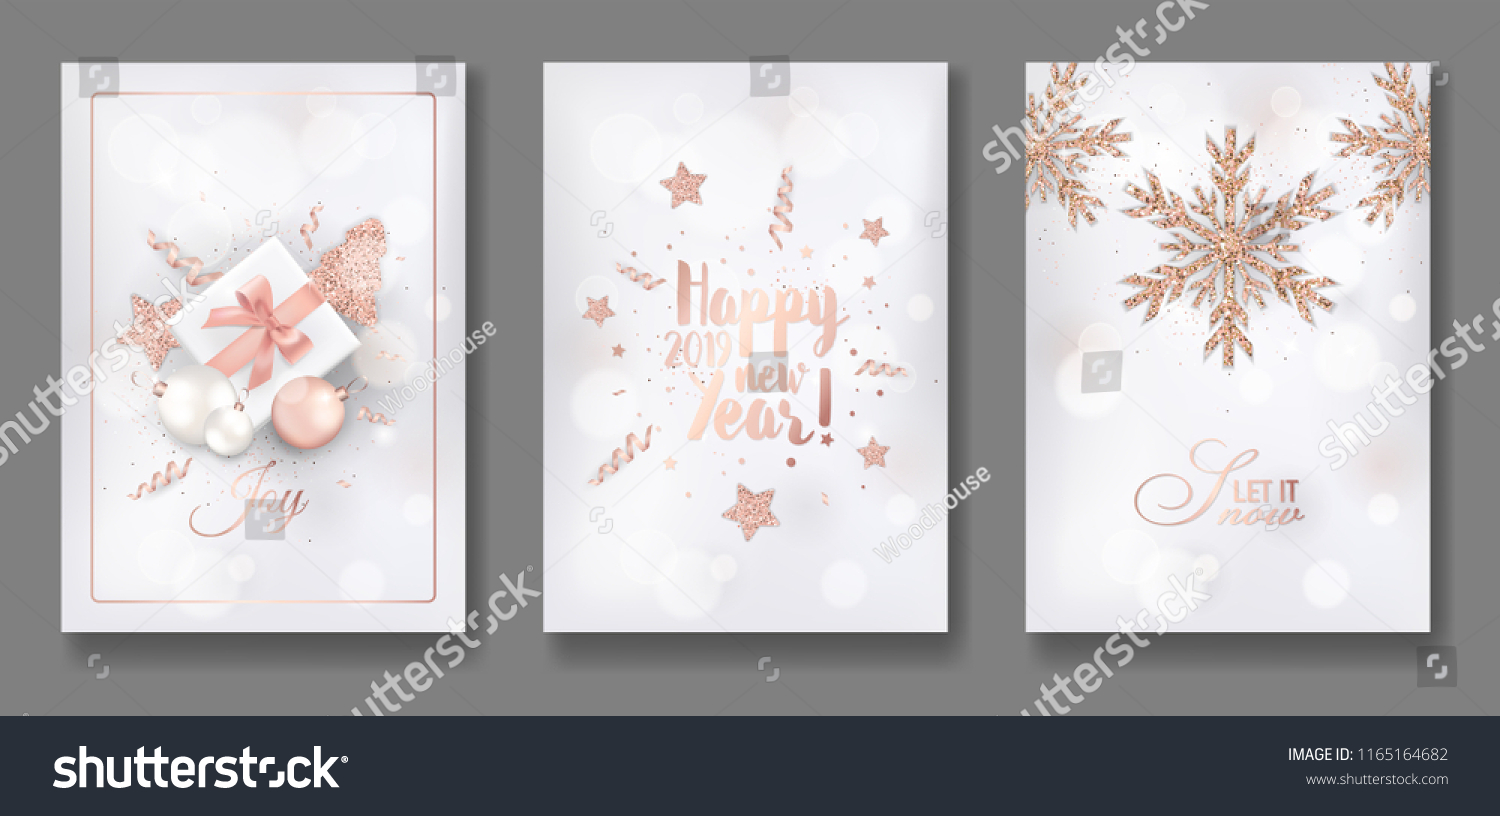 SVG of Set of Elegant Merry Christmas and New Year 2019 Cards with Shining Rose Gold Glitter Christmas Balls, Stars, Snowflakes for greetings, invitation, flyer, brochure, cover in vector svg